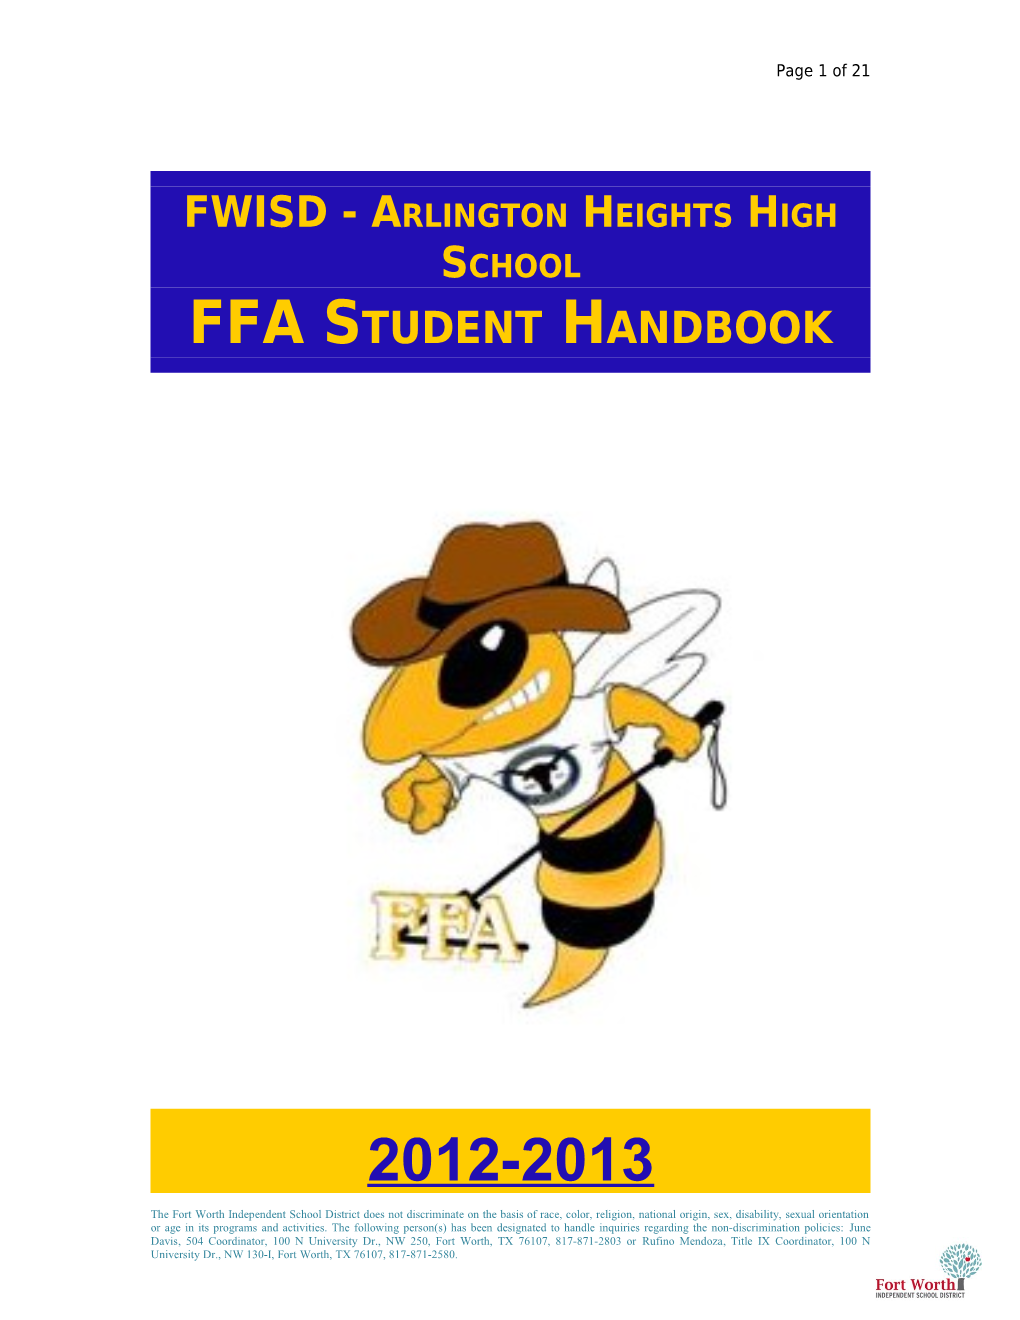 Arlington Heights FFA Student and Parent Guide